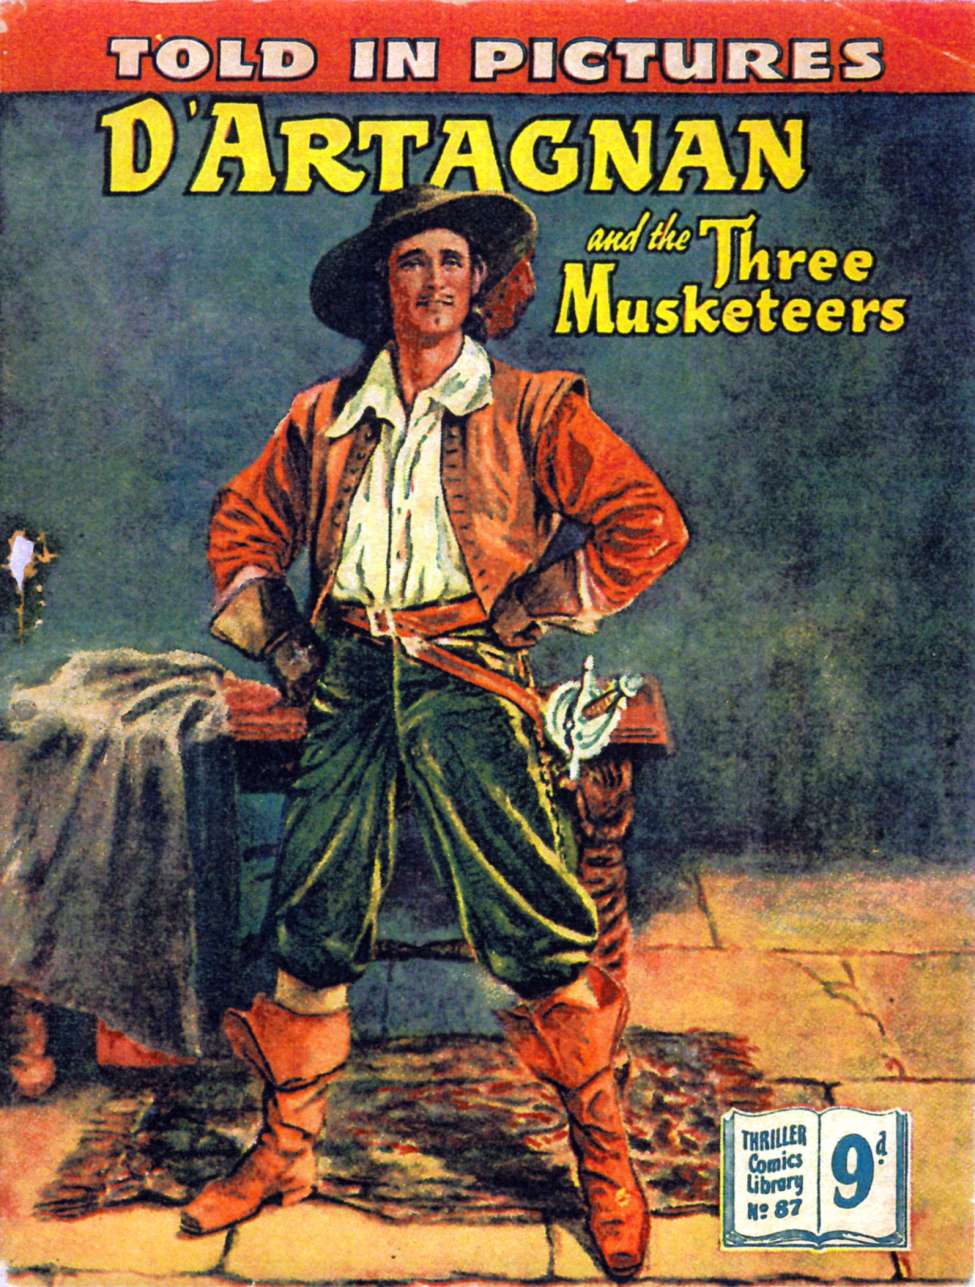 Book Cover For Thriller Comics Library 87 - D'artagnan and the Three Musketeers